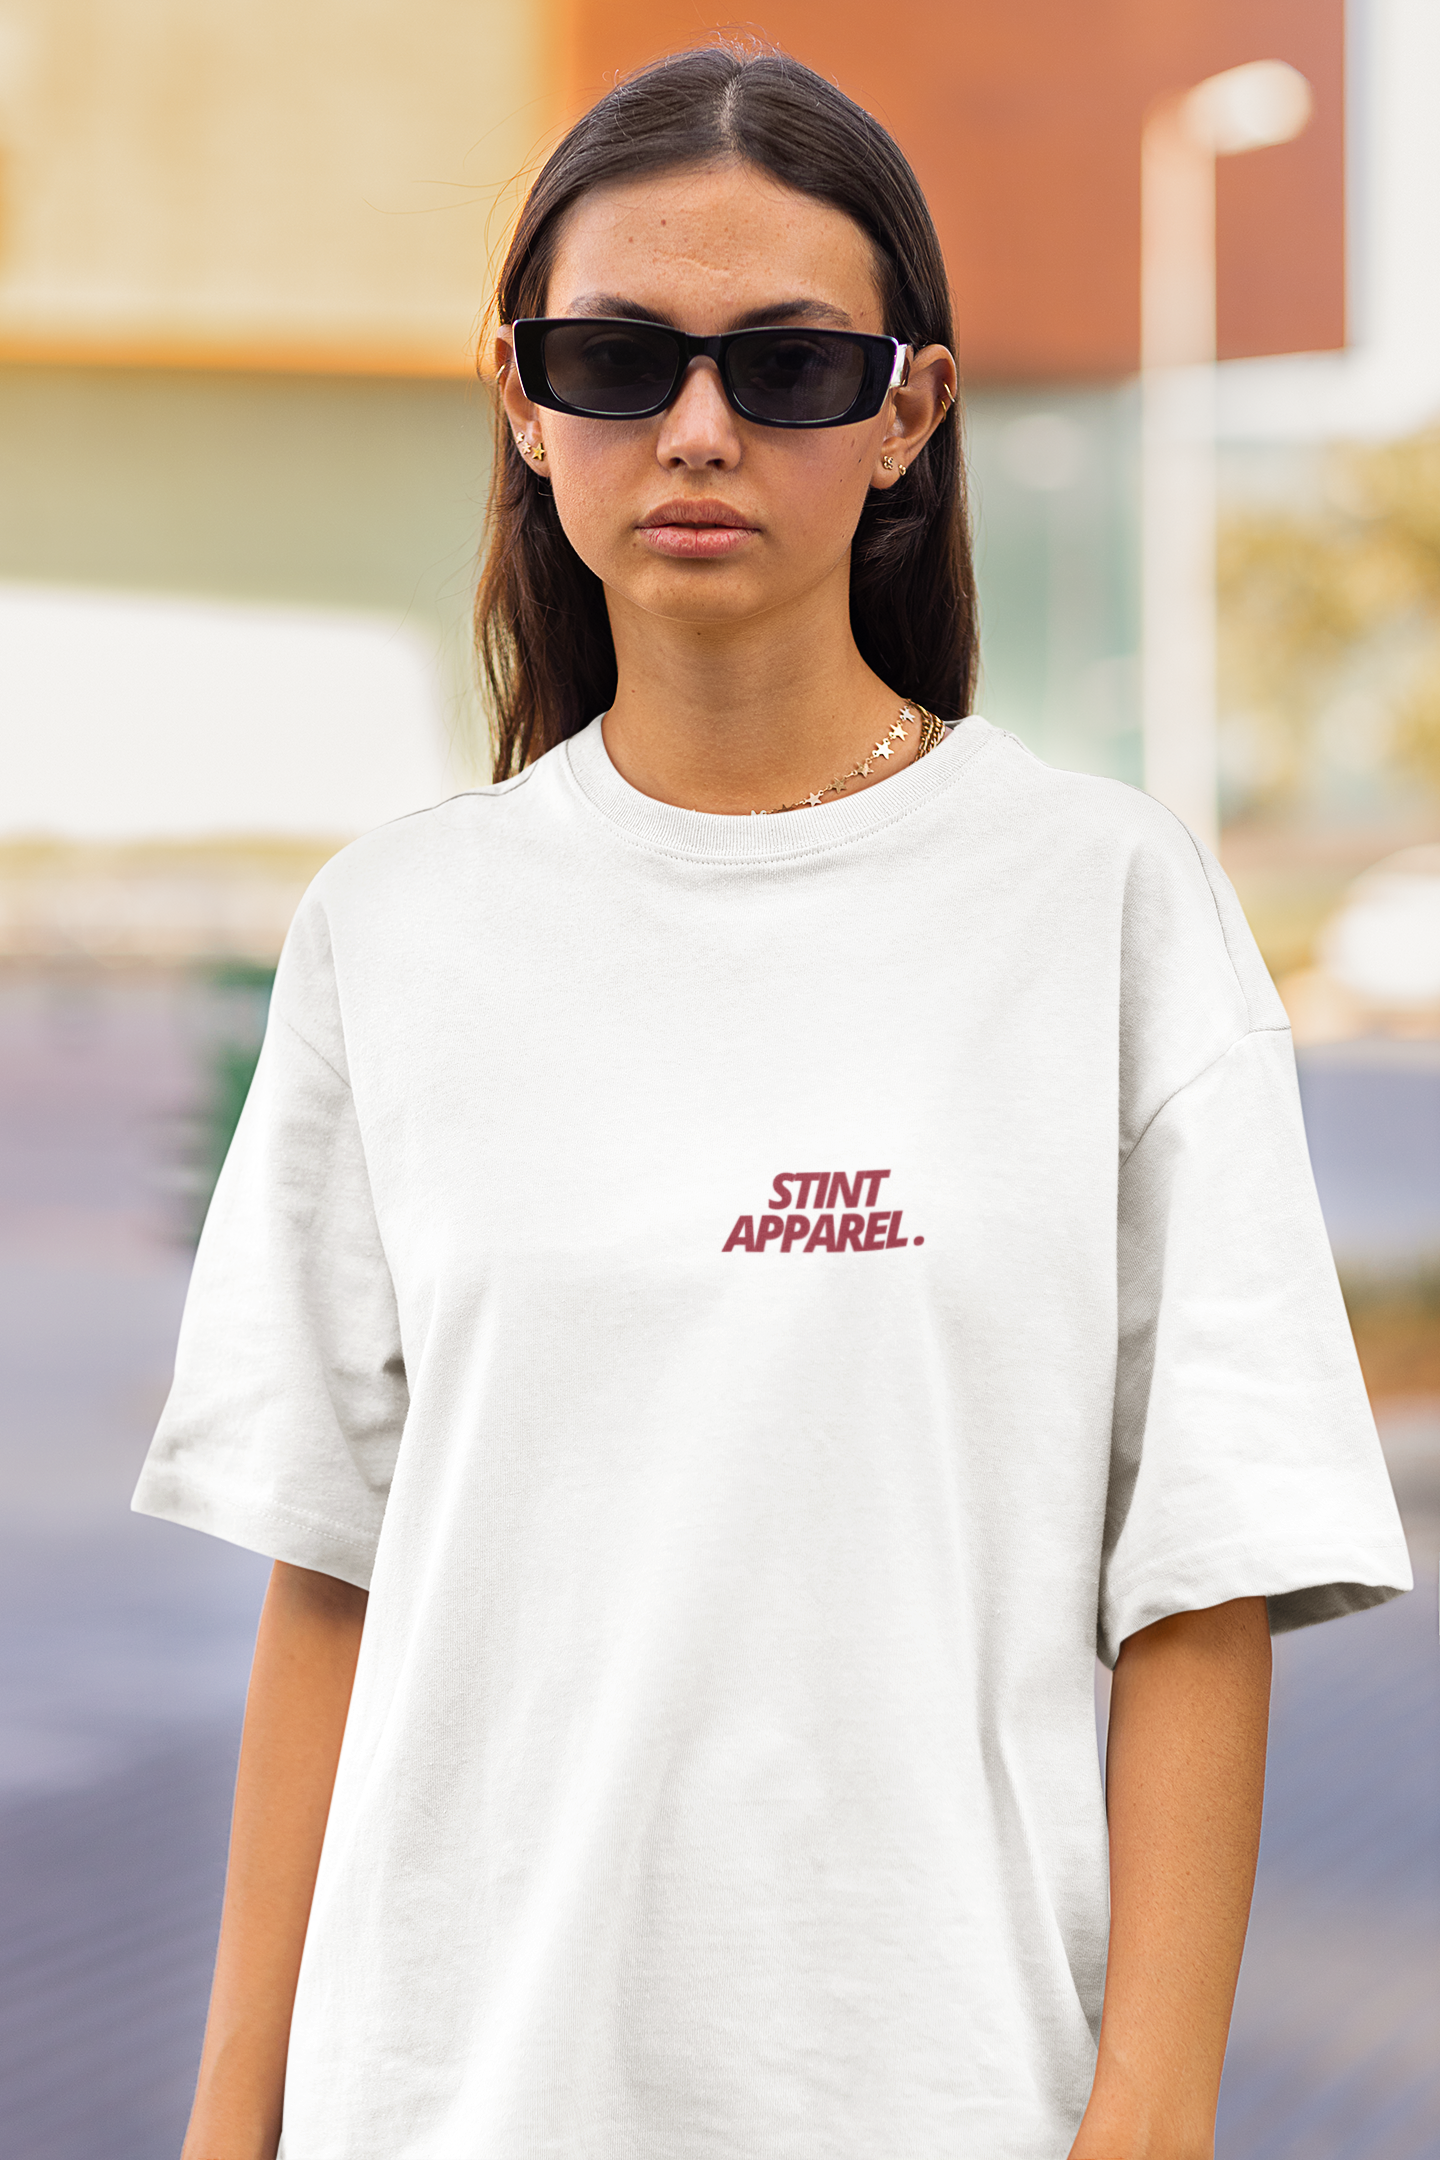 Charles Leclerc 'Lord Perceval' oversized T-shirt WOMEN